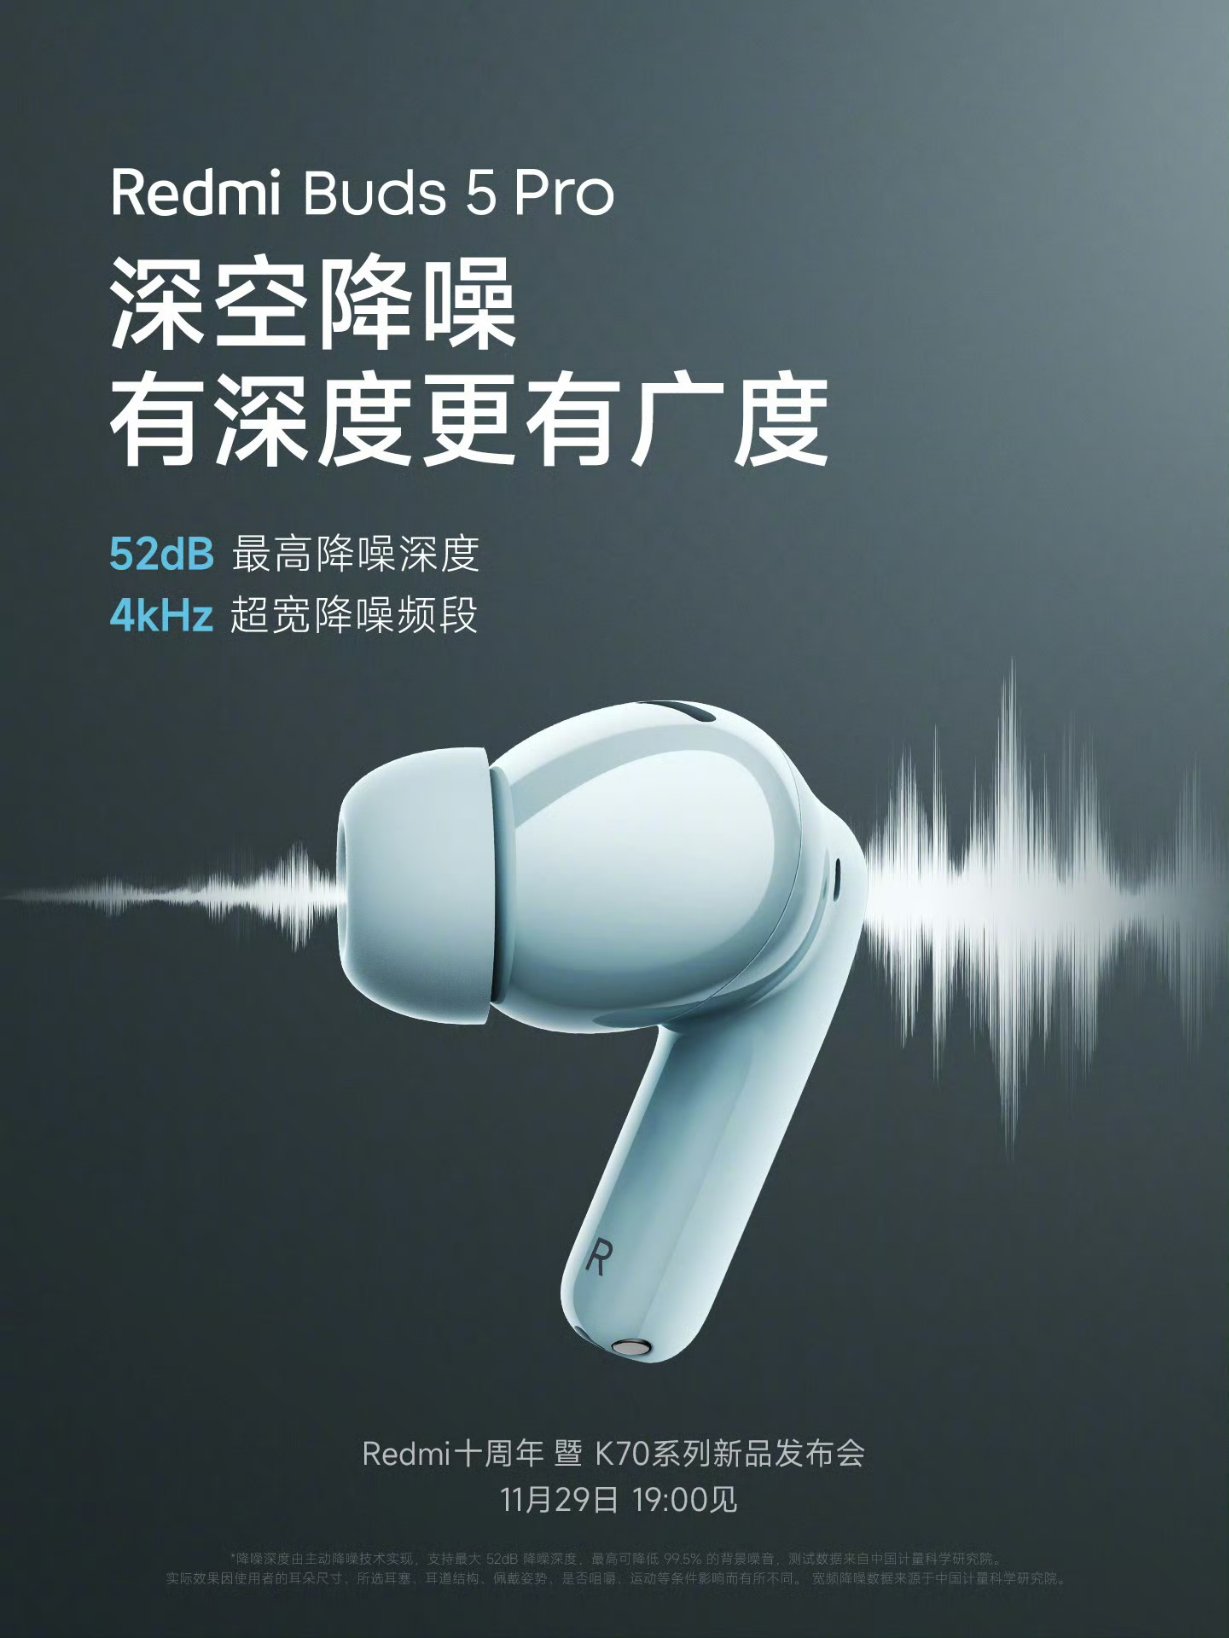 TECHNOLOGY INFO on X: Redmi Buds 5 Pro 52dB maximum noise reduction depth  4kHz ultra-wide noise reduction frequency  / X